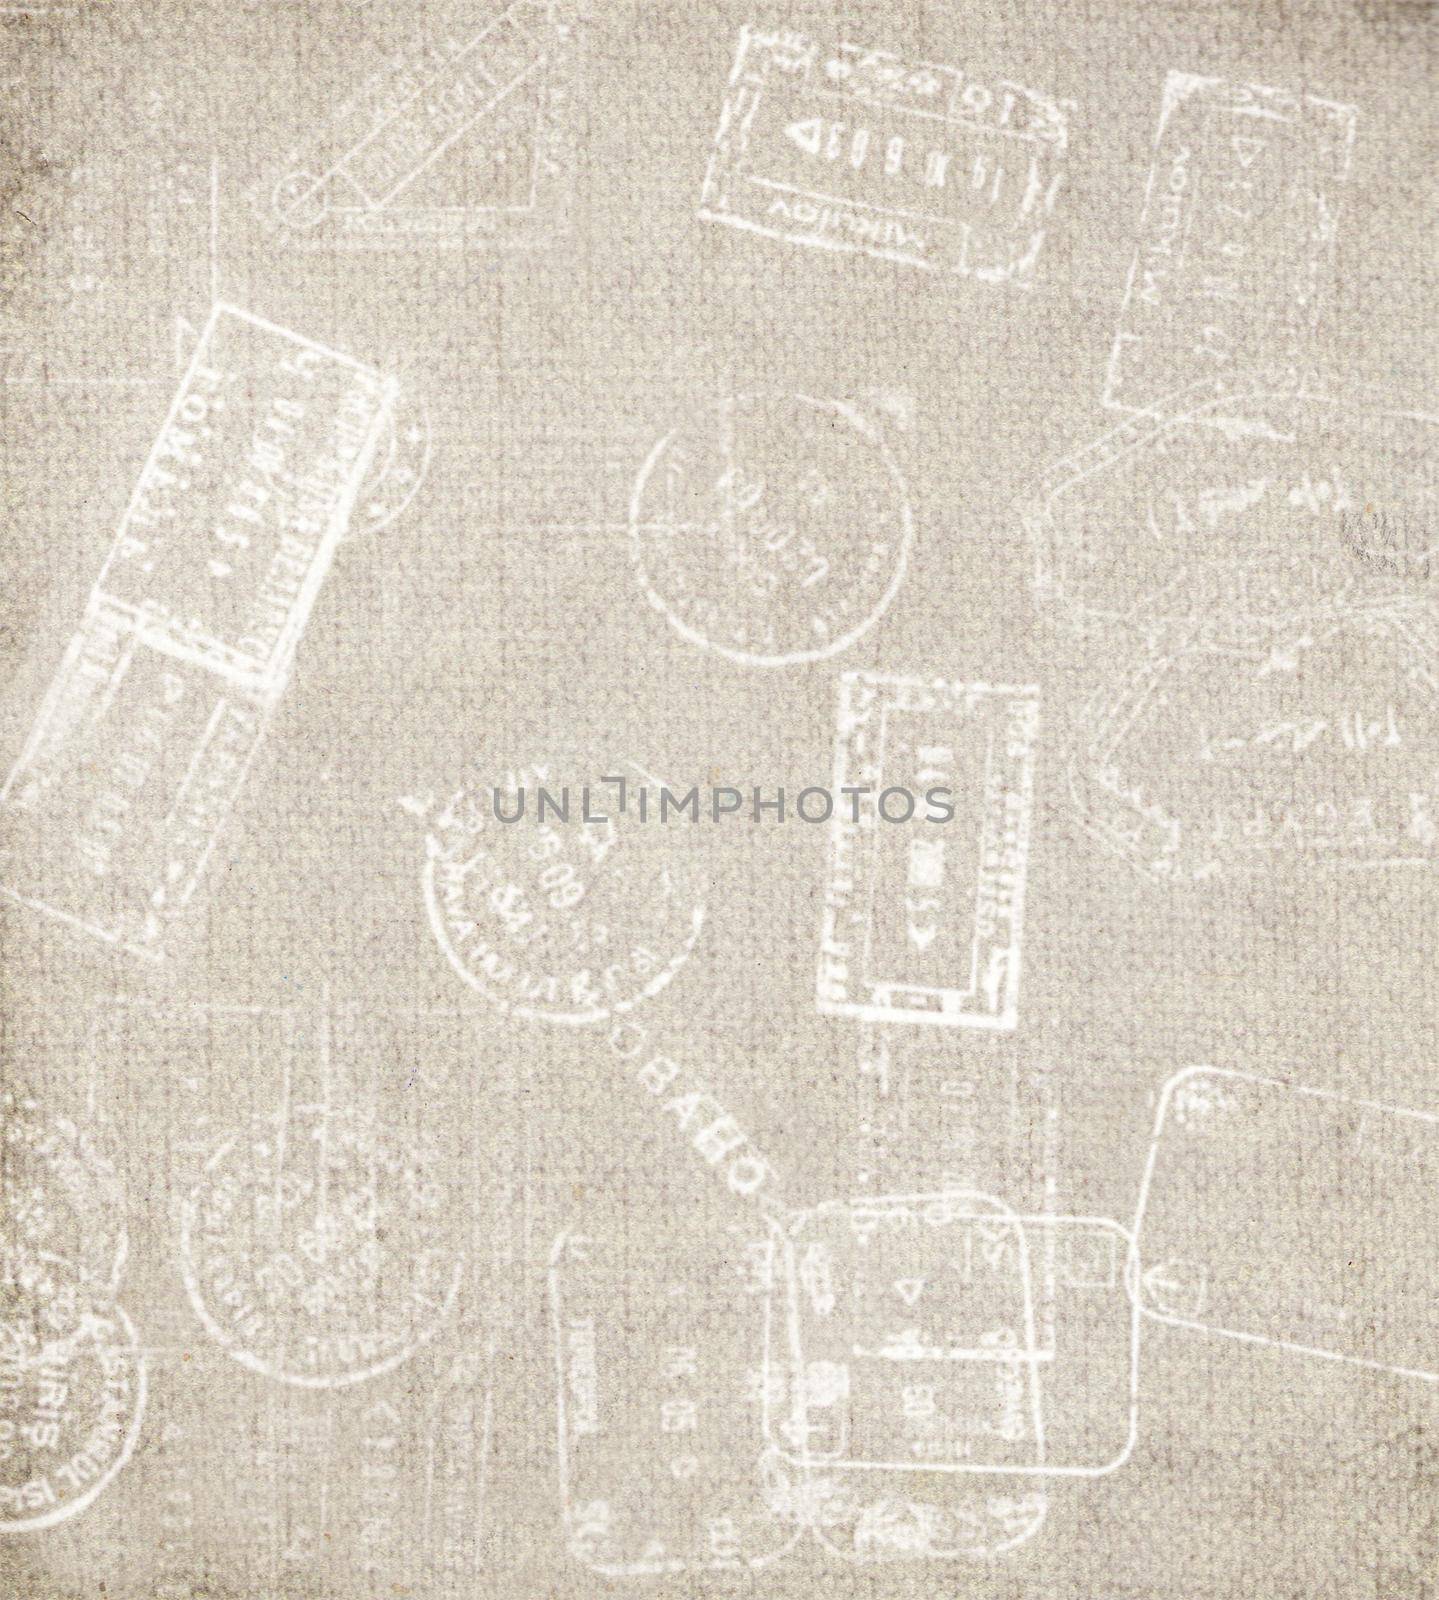 Travel background with different passport stamps by tsyhun